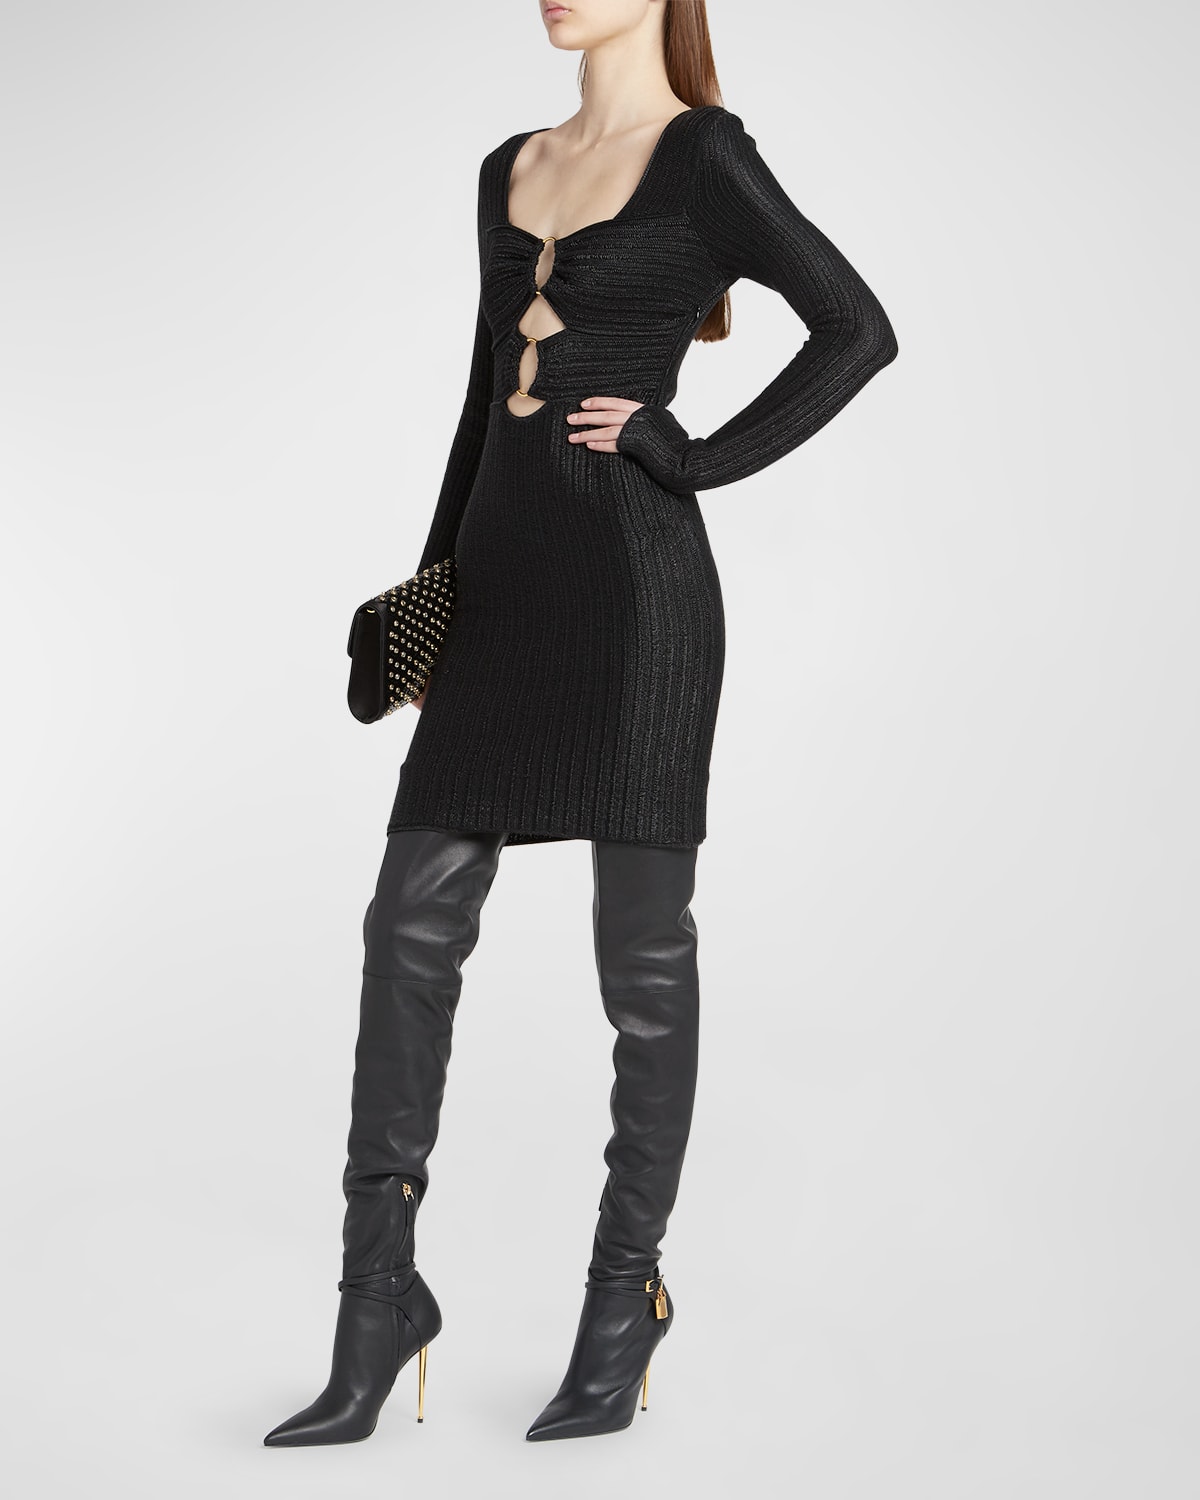 TOM FORD METALLIC WOOL KNIT DRESS WITH FRONT CUTOUTS